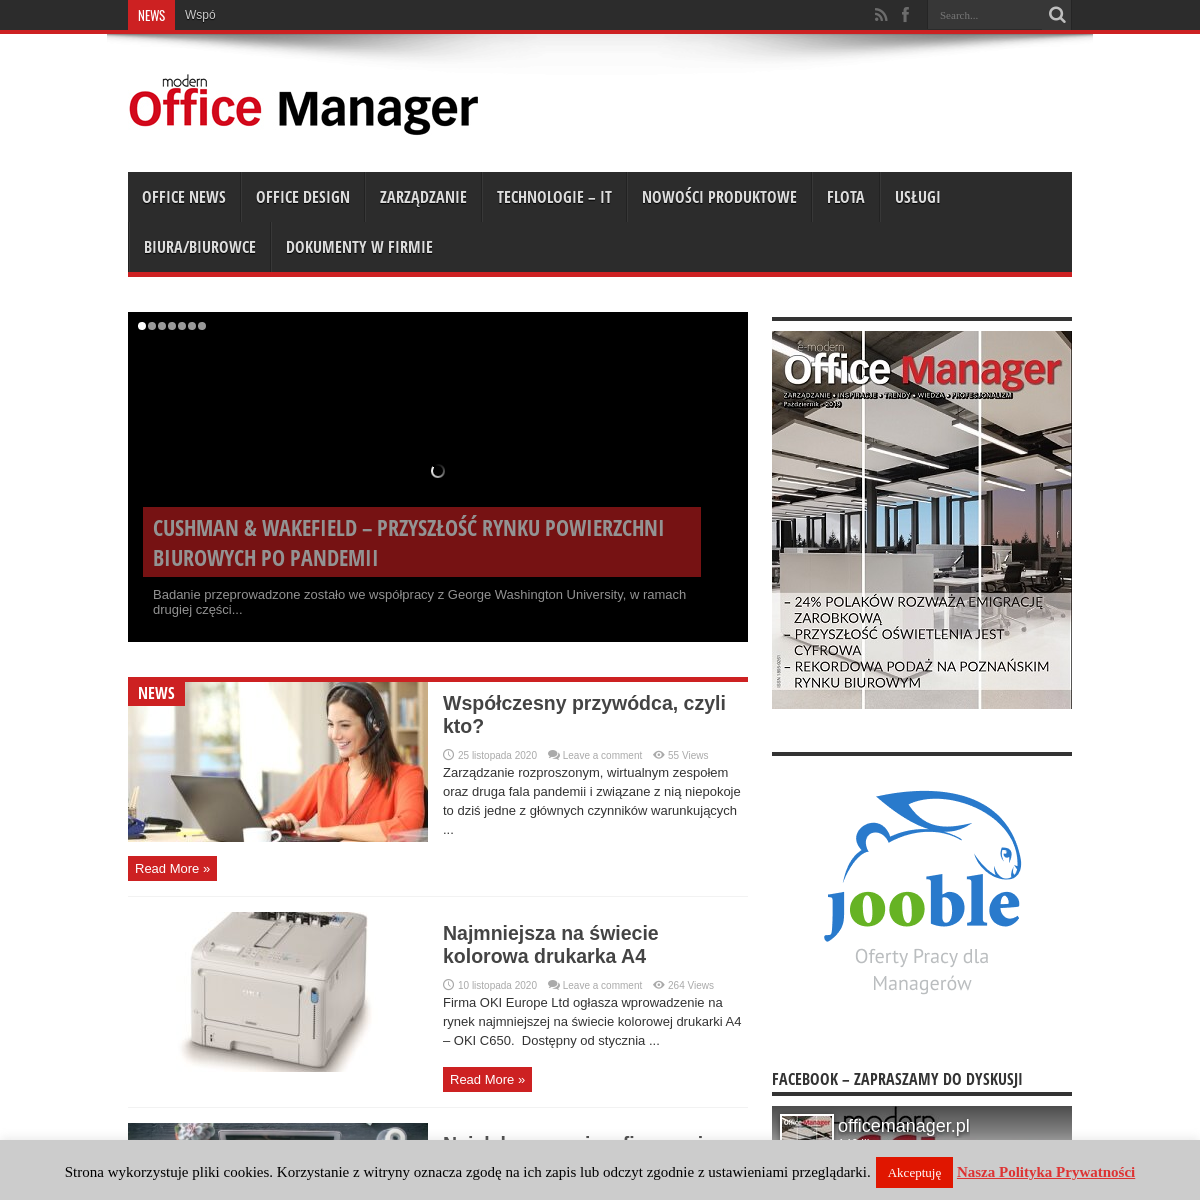 A complete backup of officemanager.pl